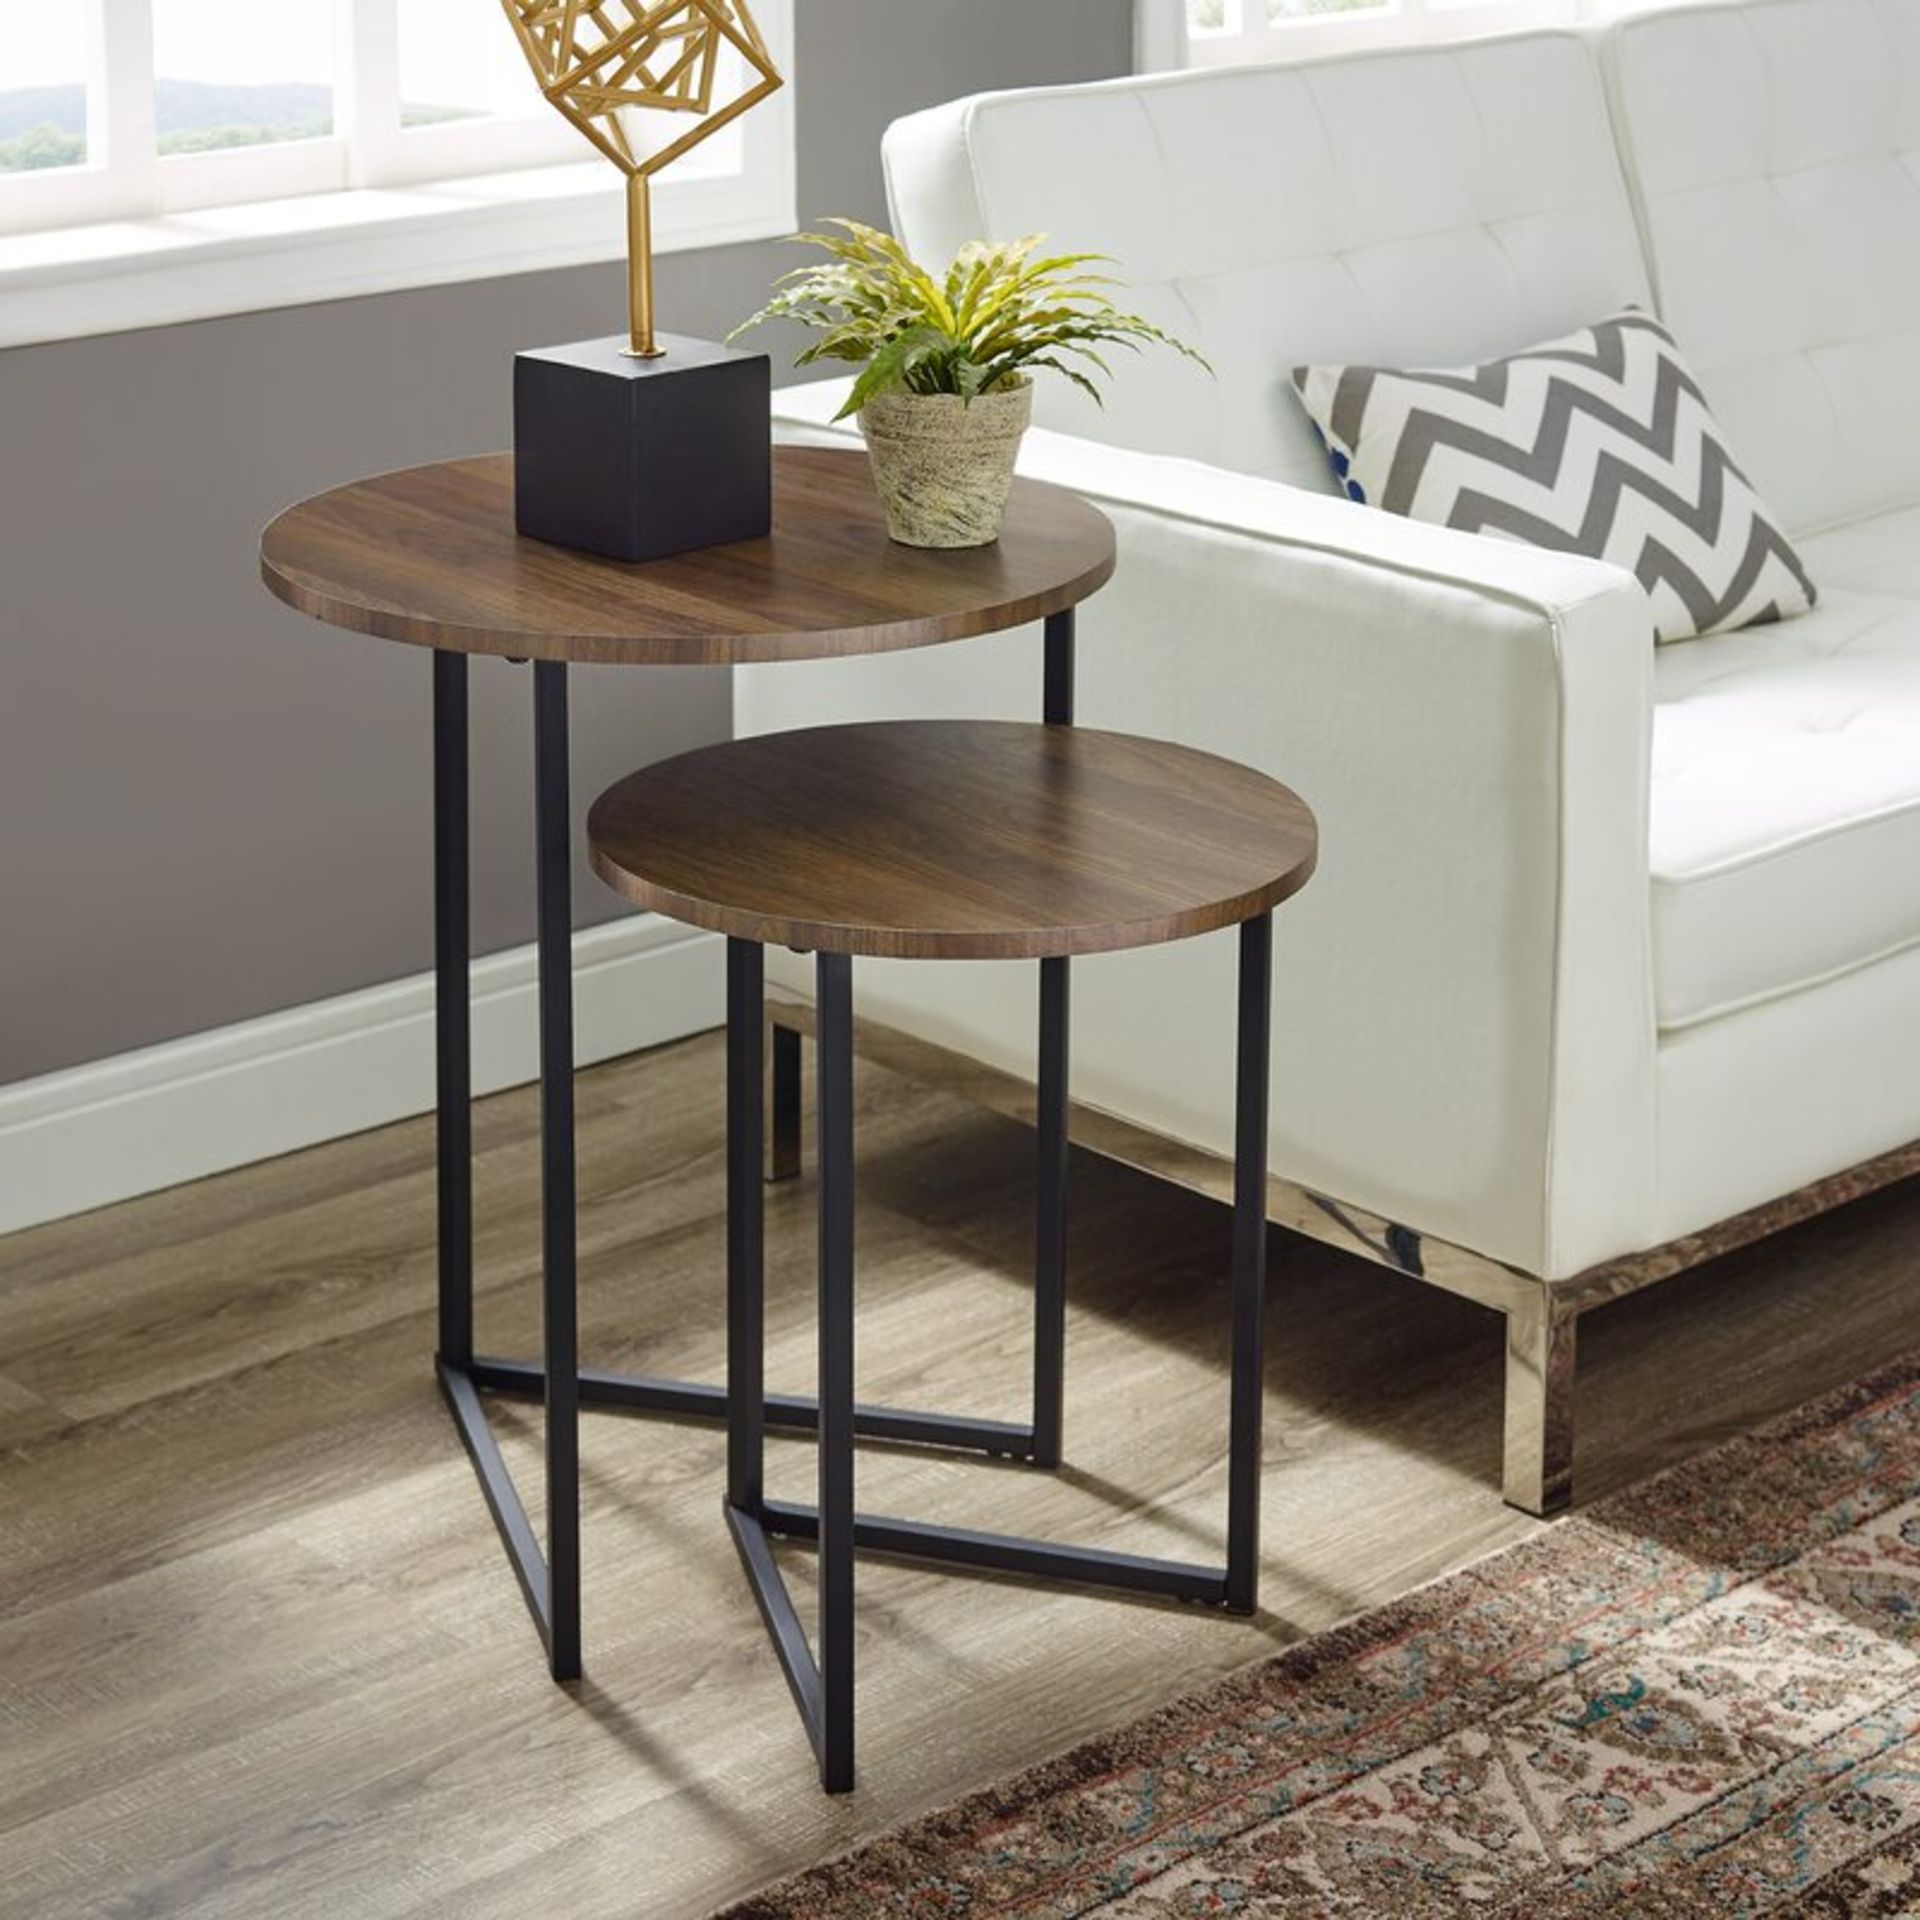 Abbotsford Feickert 2 Piece Nest of Tables - RRP £116.00 - Image 2 of 4